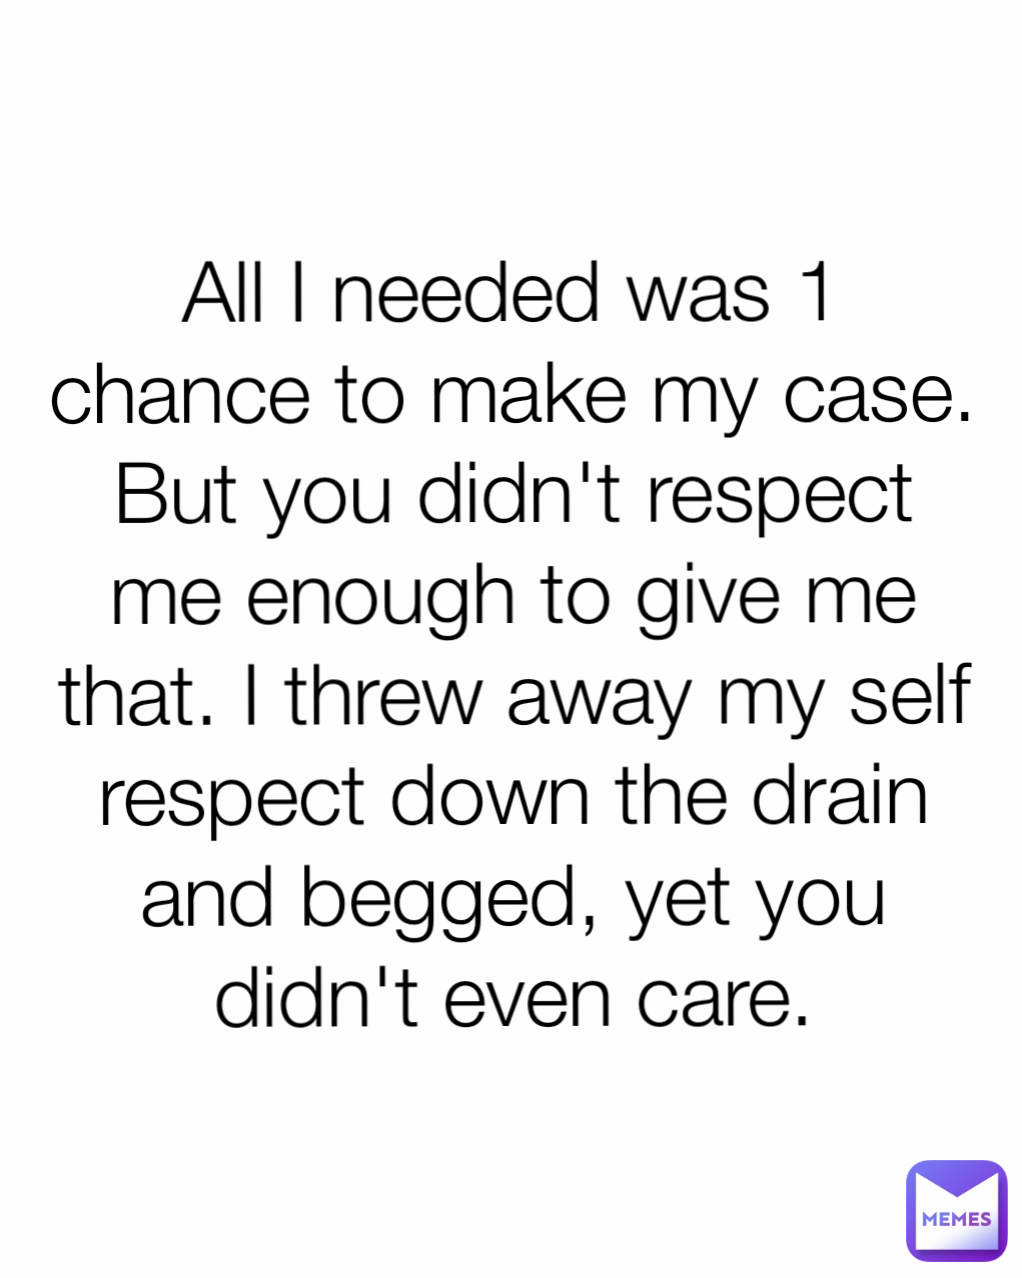 All I needed was 1 chance to make my case. But you didn't respect me enough to give me that. I threw away my self respect down the drain and begged, yet you didn't even care.